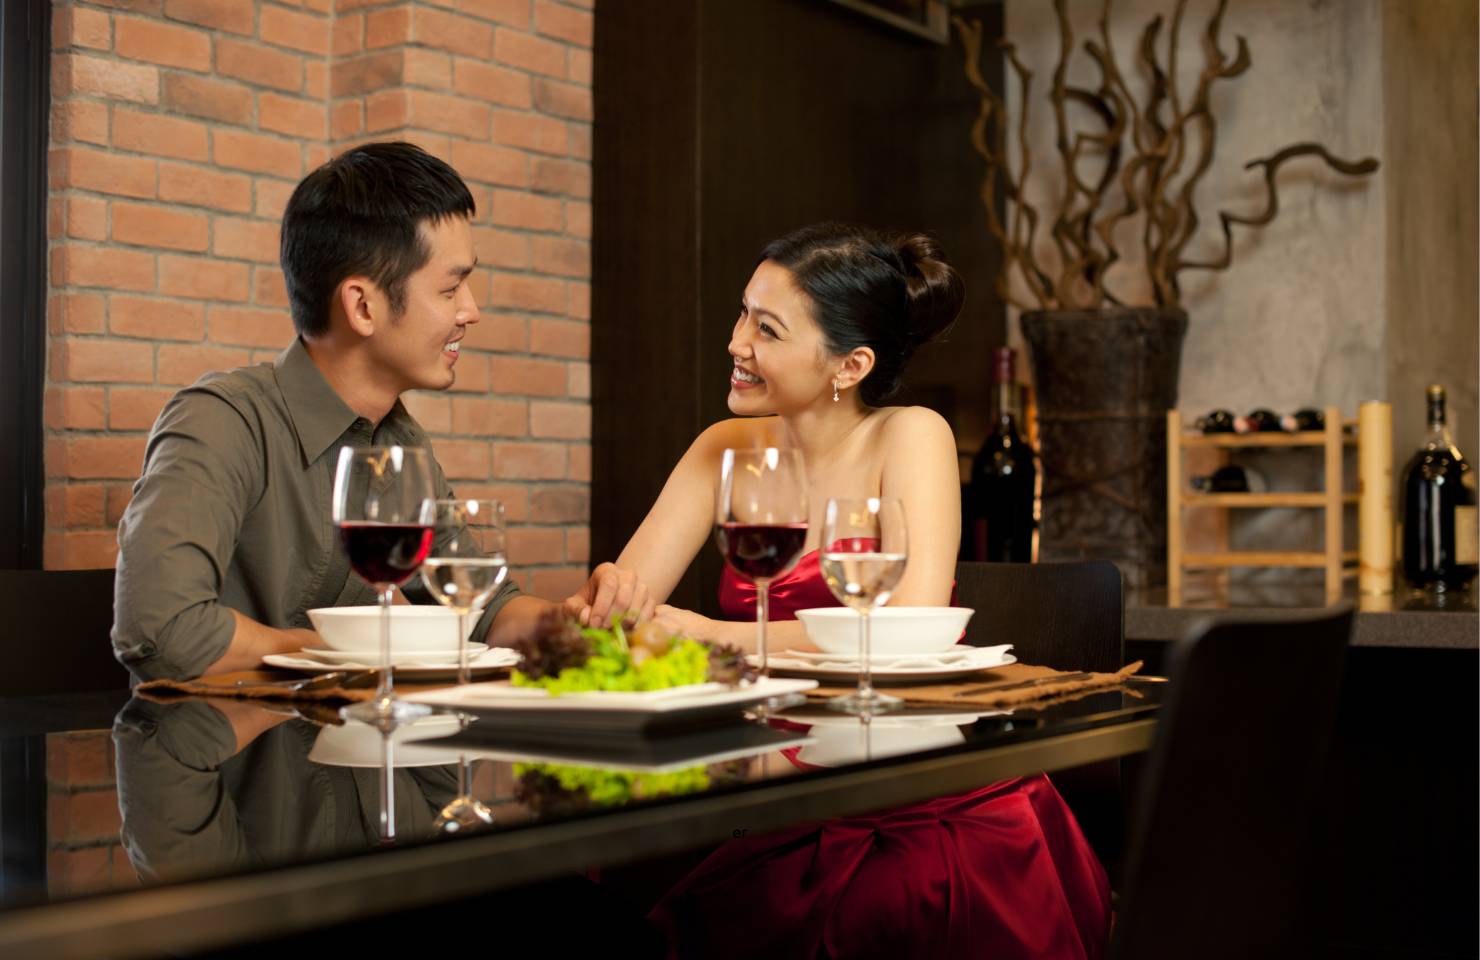 couples fine dining experience with activity gift